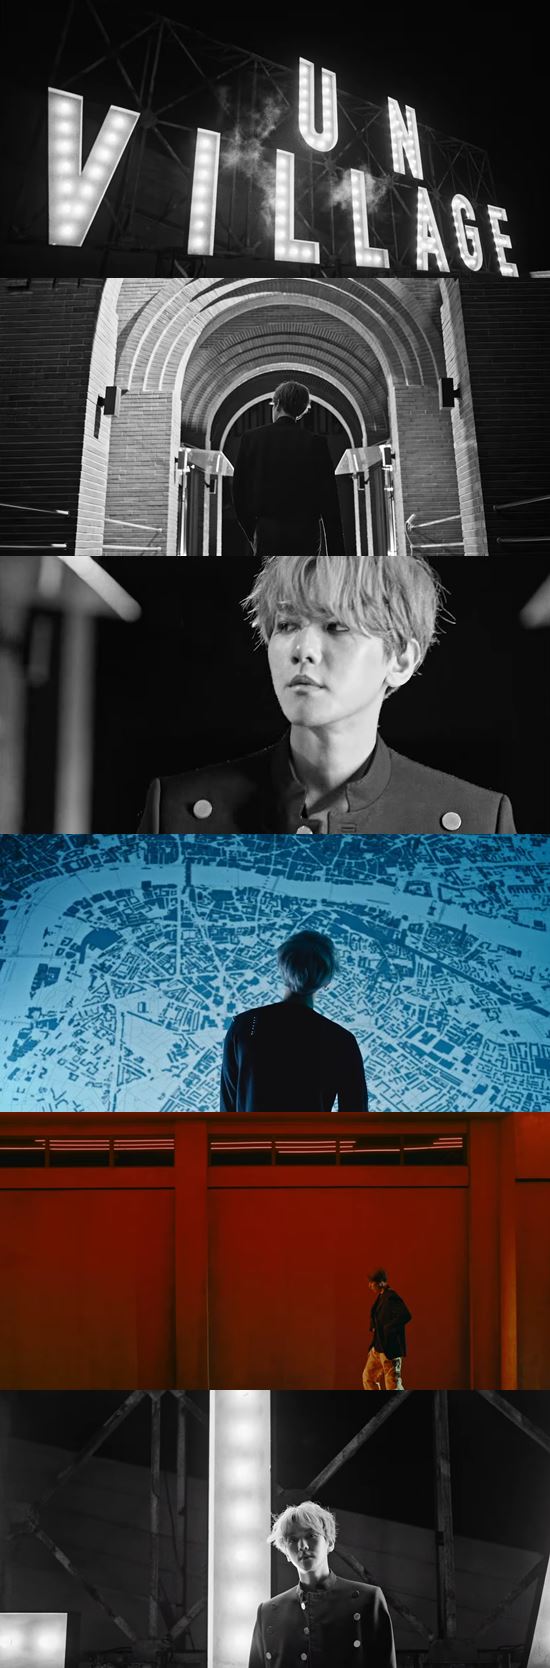 EXO Baekhyun reports his first solo with a charming new song that shakes the music charts.On Thursday, Baekhyuns first solo album, City Lights, was released, an album that has received a hot interest of 400,000 pre-orders alone.City Lights filled with six songs in a trendy atmosphere.It boasts a colorful lineup of dark children, stereotypes, chacha Malone, London Noise, Kensi, Deeze, Cold, Leon, dress and surge.Rapper Binzino also participated in the song Stay Up.The title United Nations Village is a title song that Baekhyun has scored after a hard time.All the songs were good, so I did not easily choose the title song, but I dropped to show a new look while Top Model on hip-hop R & B that I usually wanted to show.As soon as he heard this song, Baekhyun, who was in love with charm in 10 seconds, made efforts such as making a correction recording two or three times unlike usual.Baekhyun is the main vocal, but at the same time he has excellent performance ability to show dance breaks at concerts, but this time he refrains from performance and appeals to his sexy voice completely.If EXO is the sexy, then Baekhyun is the sexy to listen to.The lyrics to United Nations Village have already made significant headlines online.The lyrics of the Childrens Park in Reading and the United Nations Village Hill in Hannam-dong are not found in the existing EXO songs.Baekhyun took it positively in that it caused curiosity about the song.The context of the whole lyrics is romantic, including We look at the moon and you & me relax and chillein, If you see a broken streetlight / one, turn off the light below it / This place is enough to shine with you.The music video atmosphere is also very sensual.Baekhyuns burden was a virtuous cycle of more grown skills and outstanding music, and he cleverly chose to maximize his strengths rather than to write and write Top Model.Issuman is a frequent listenerPhoto: SM Entertainment